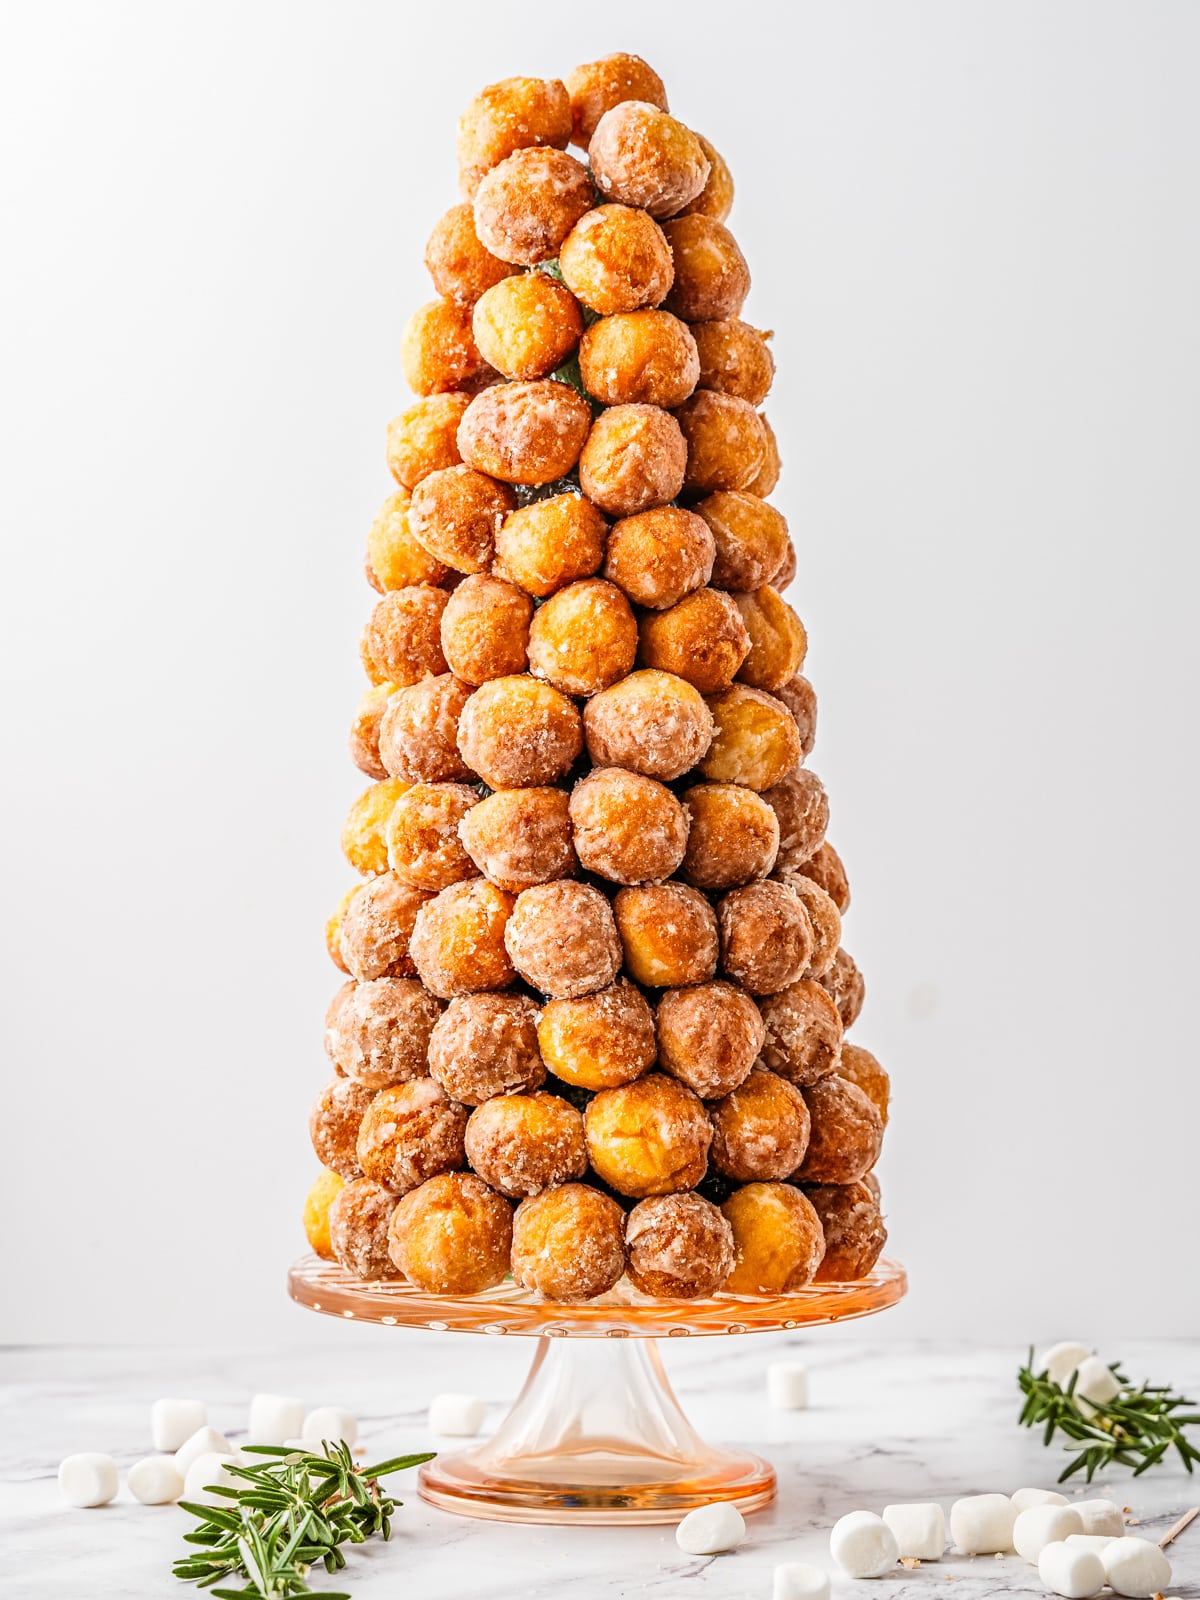 Styrofoam cone covered with donut holes.